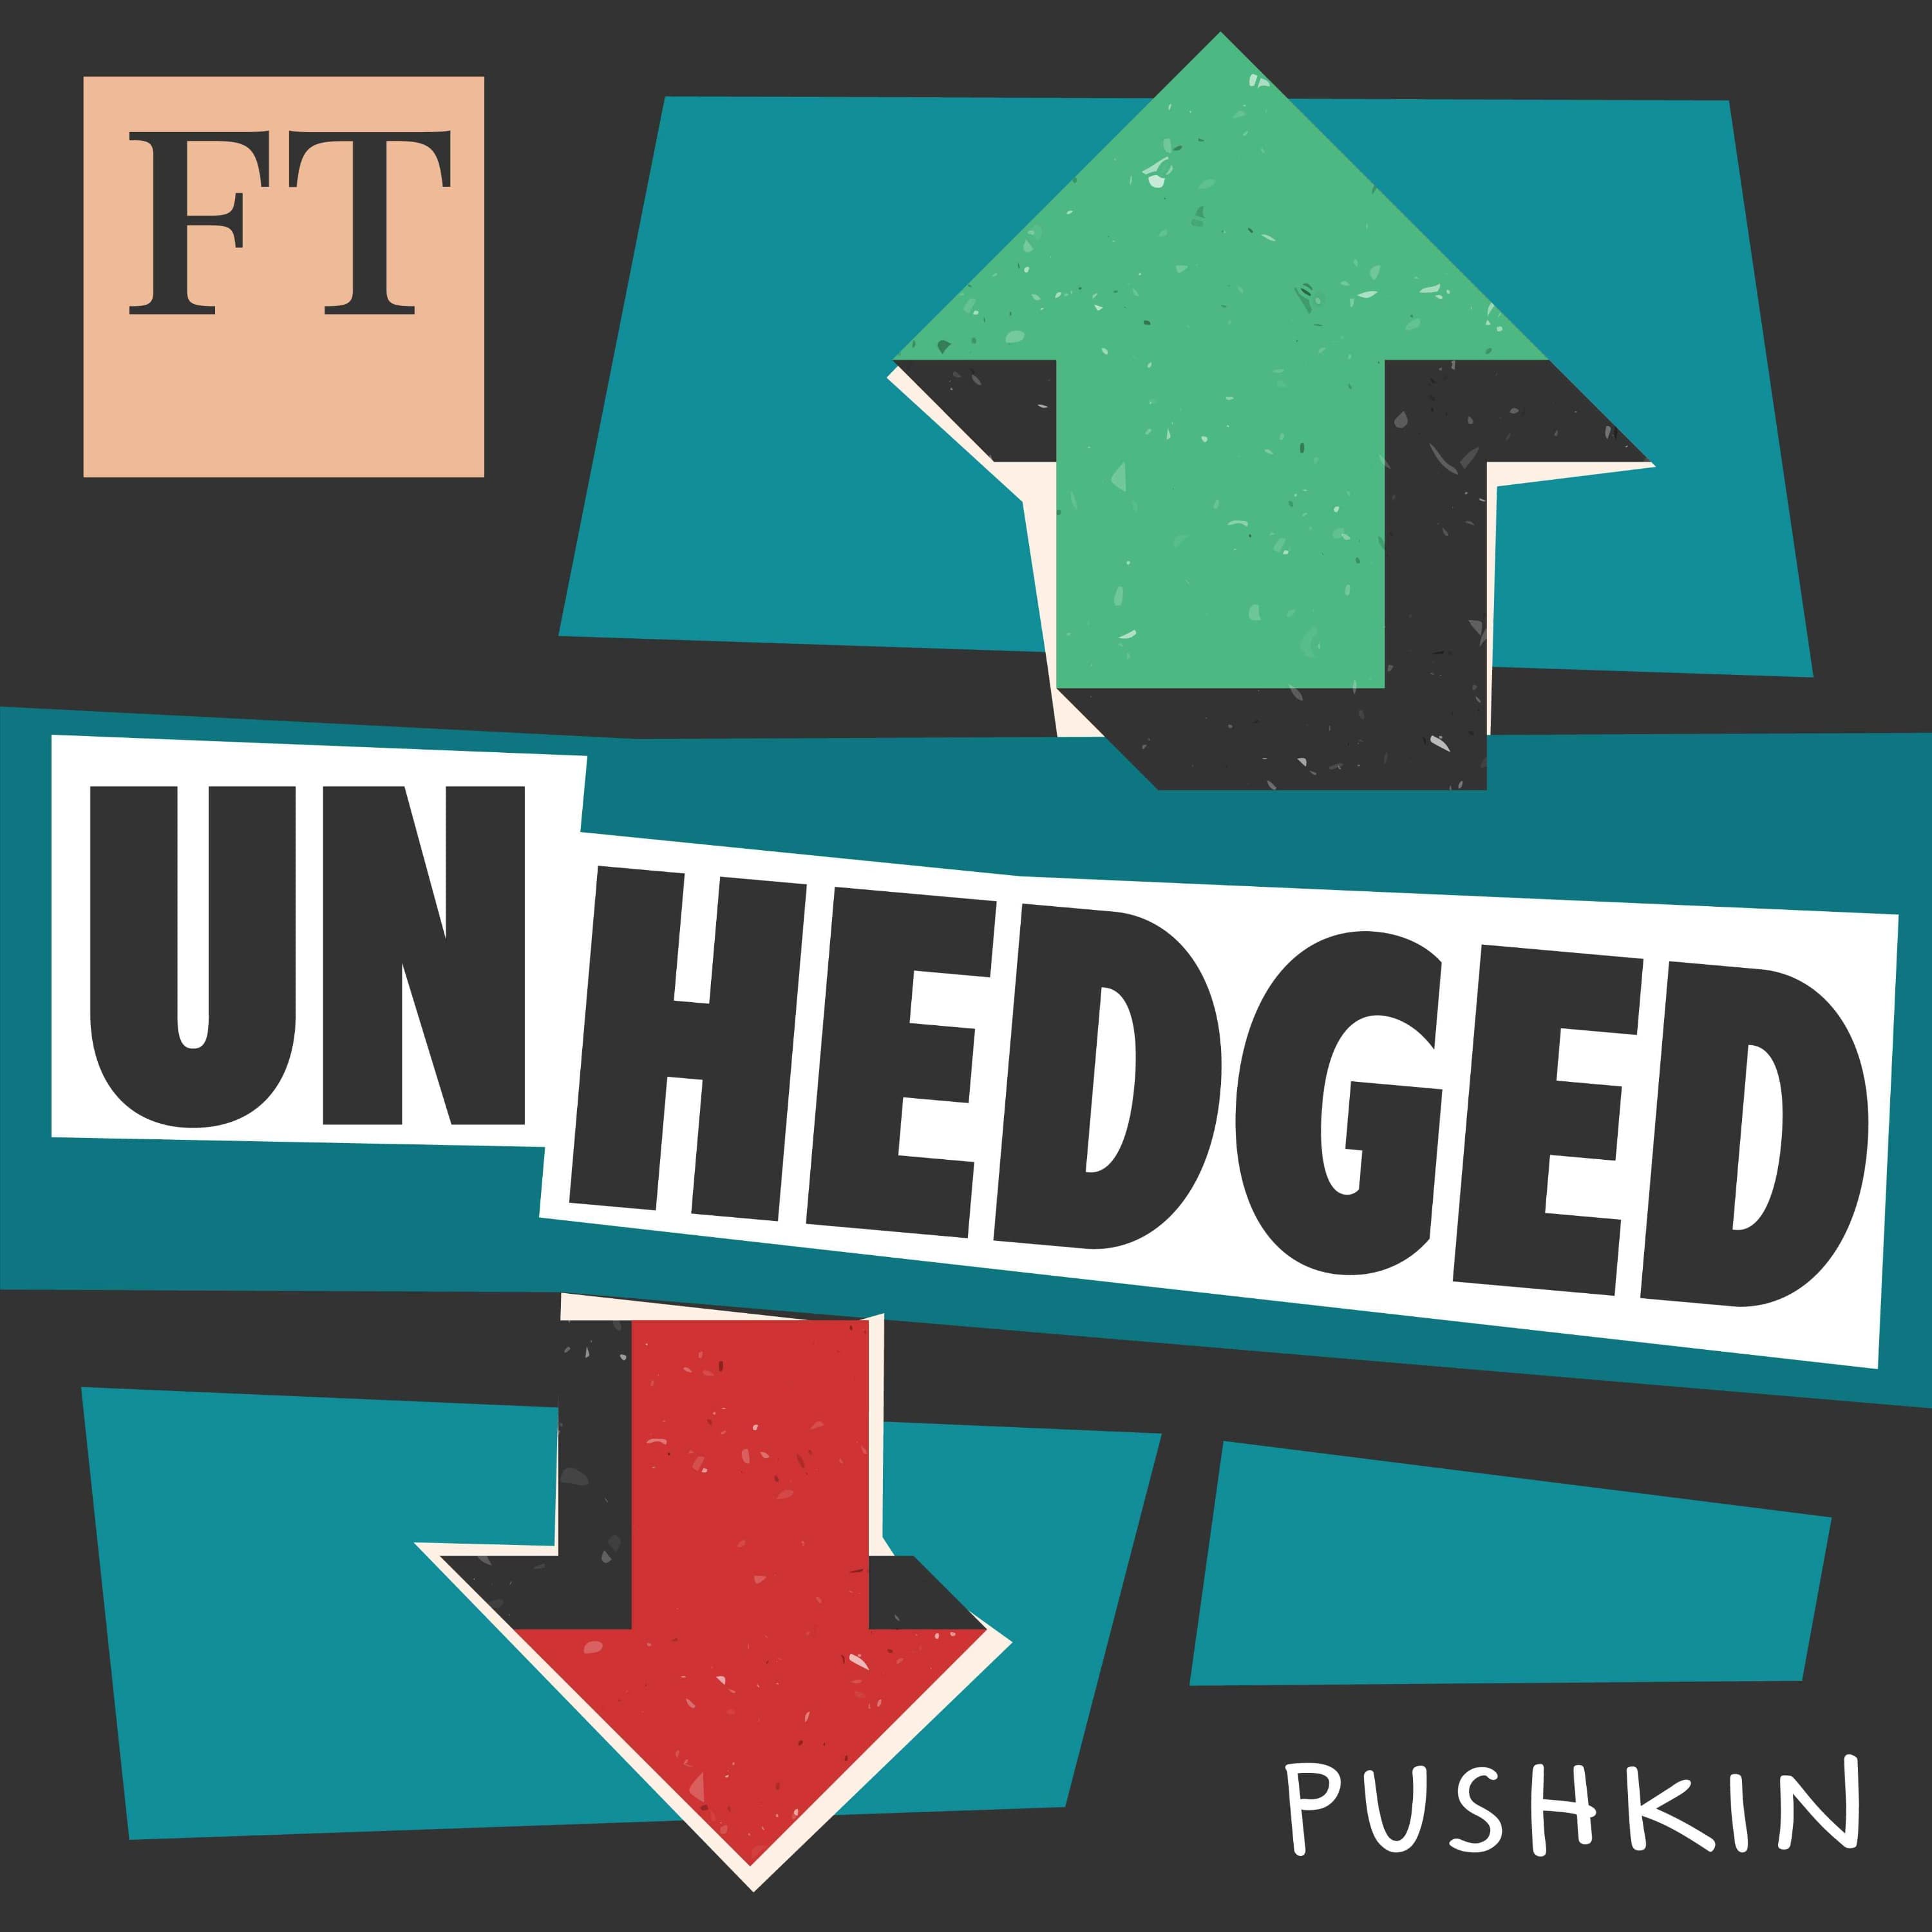 Unhedged: a new markets podcast from the FT - Financial Times